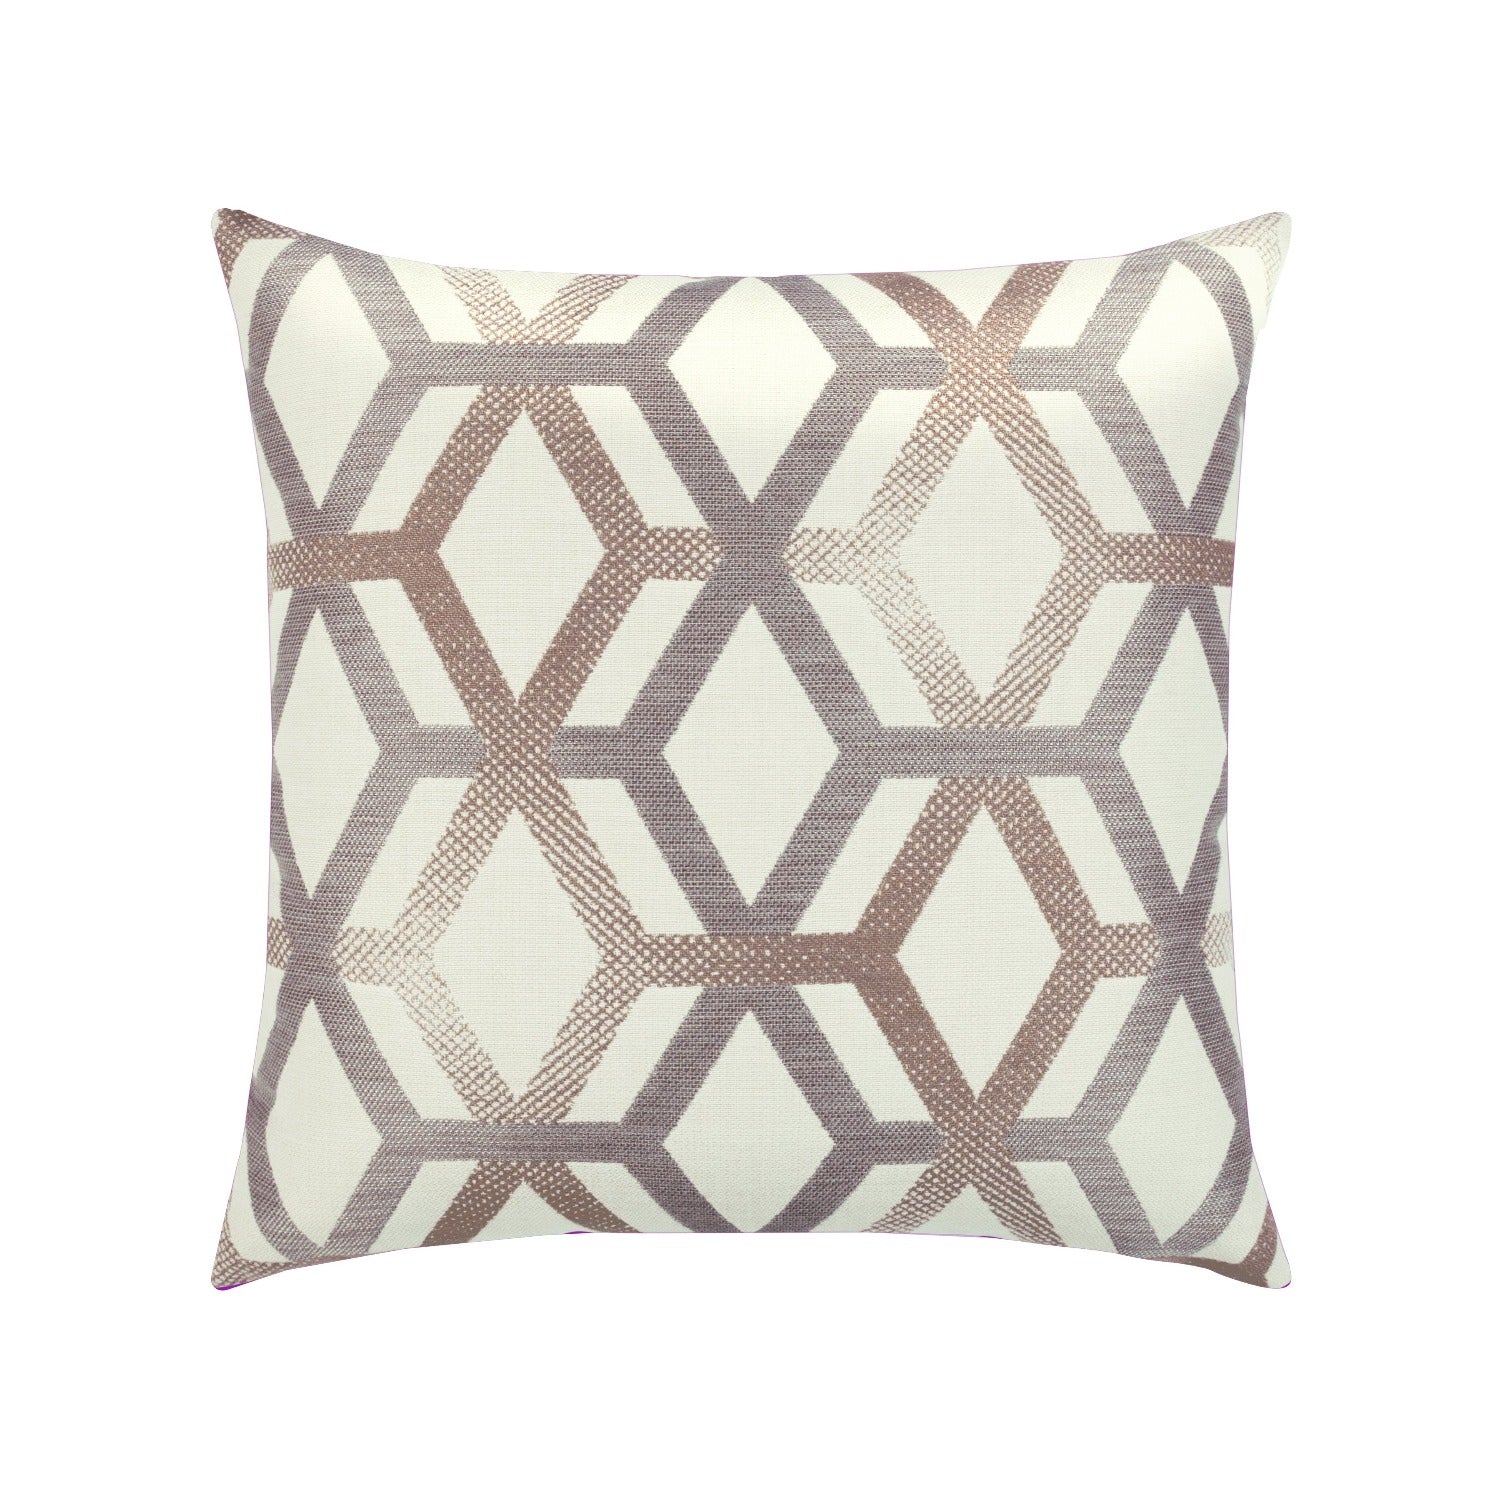 Elaine Smith Lustrous Lines 20 inch Square Pillow 12031017